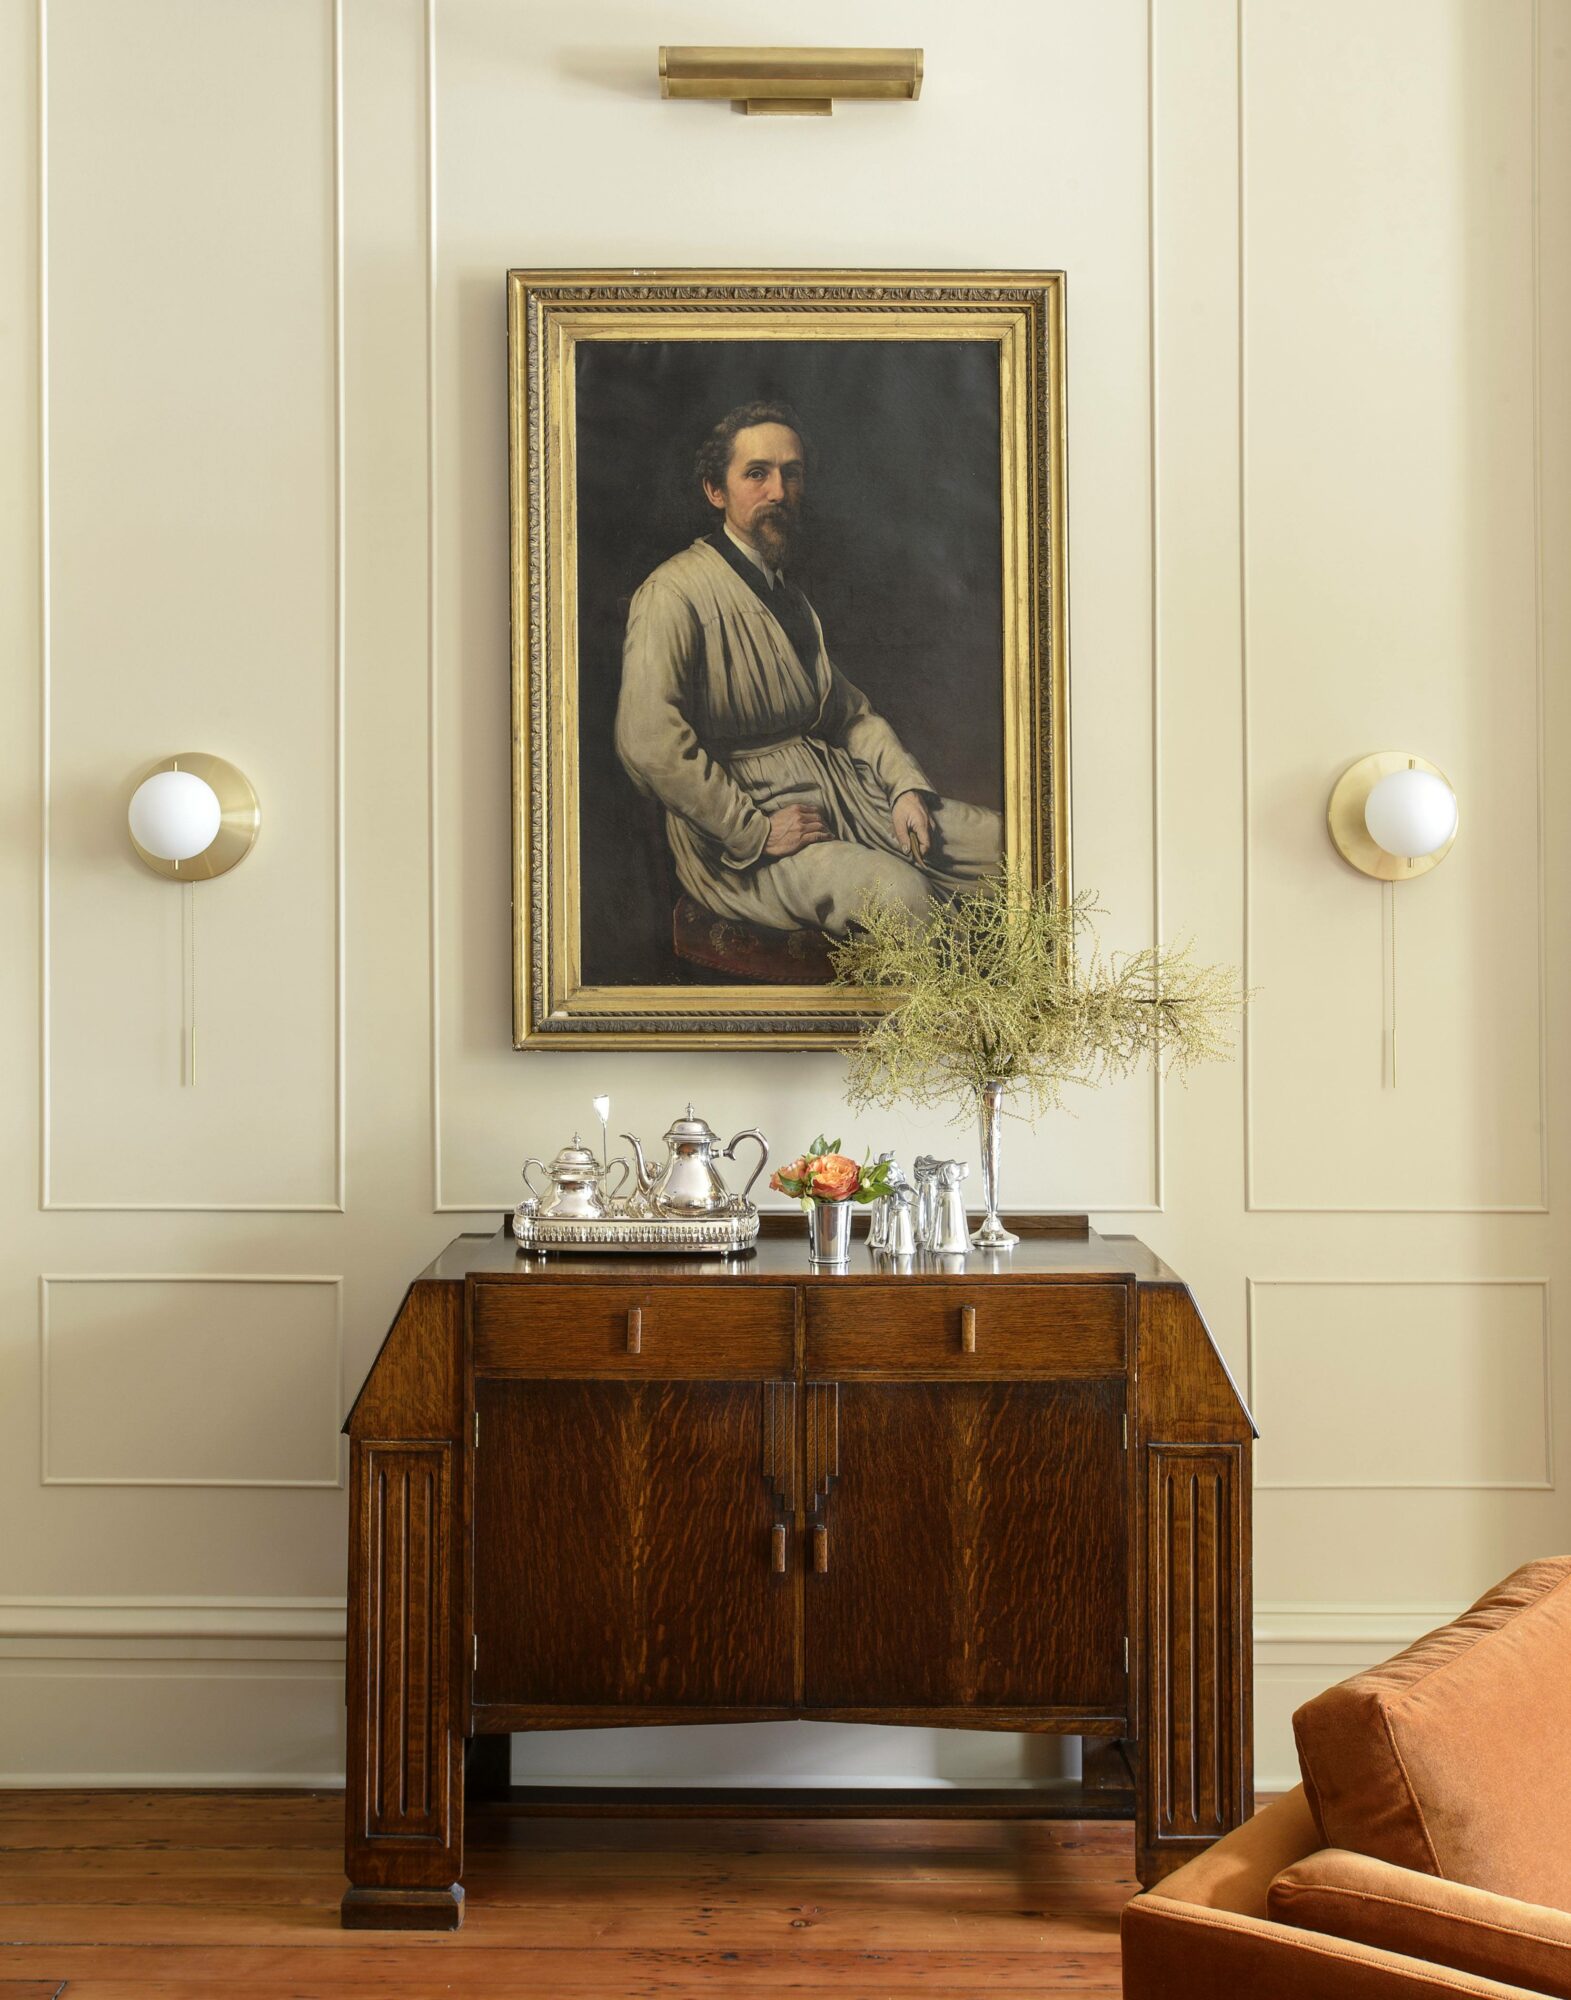 Workstead Redesigns A Historic Charleston Home